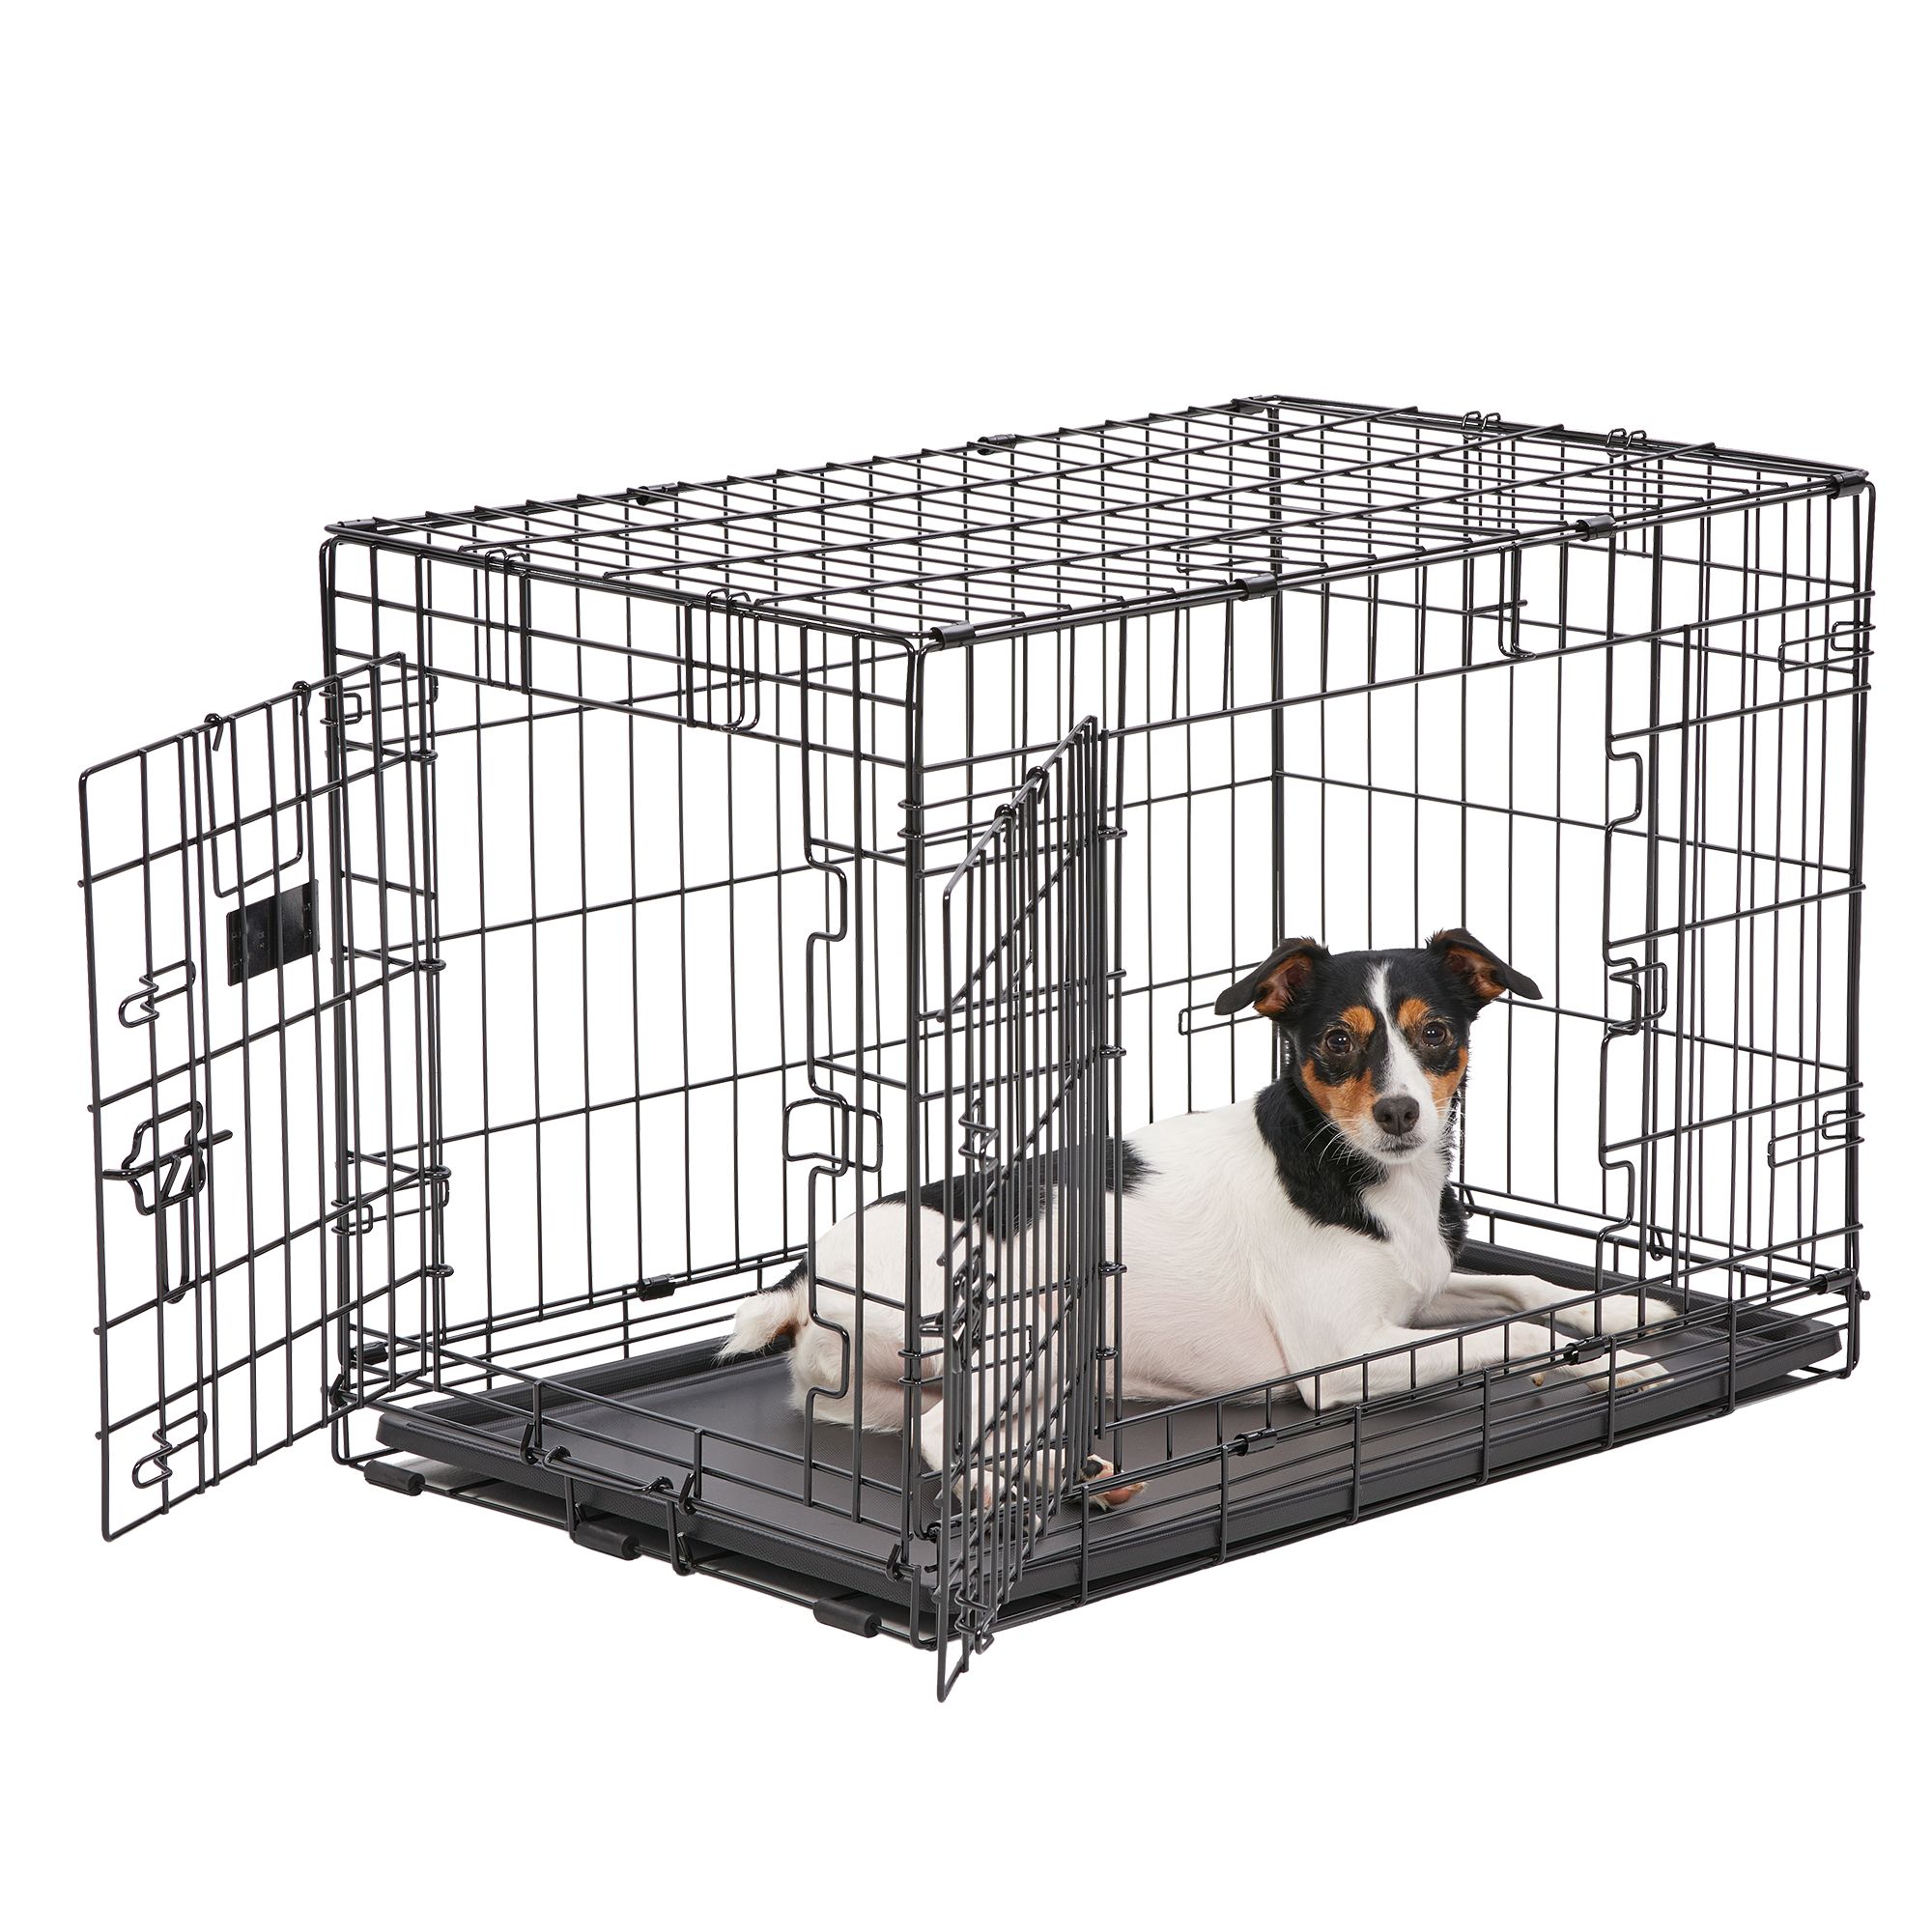 48-inch Wowsubli Pet Cage Dog Cat Puppy Training Folding Crate Pet Animal Transport with Solid Tray 2 Doors 4 Locks